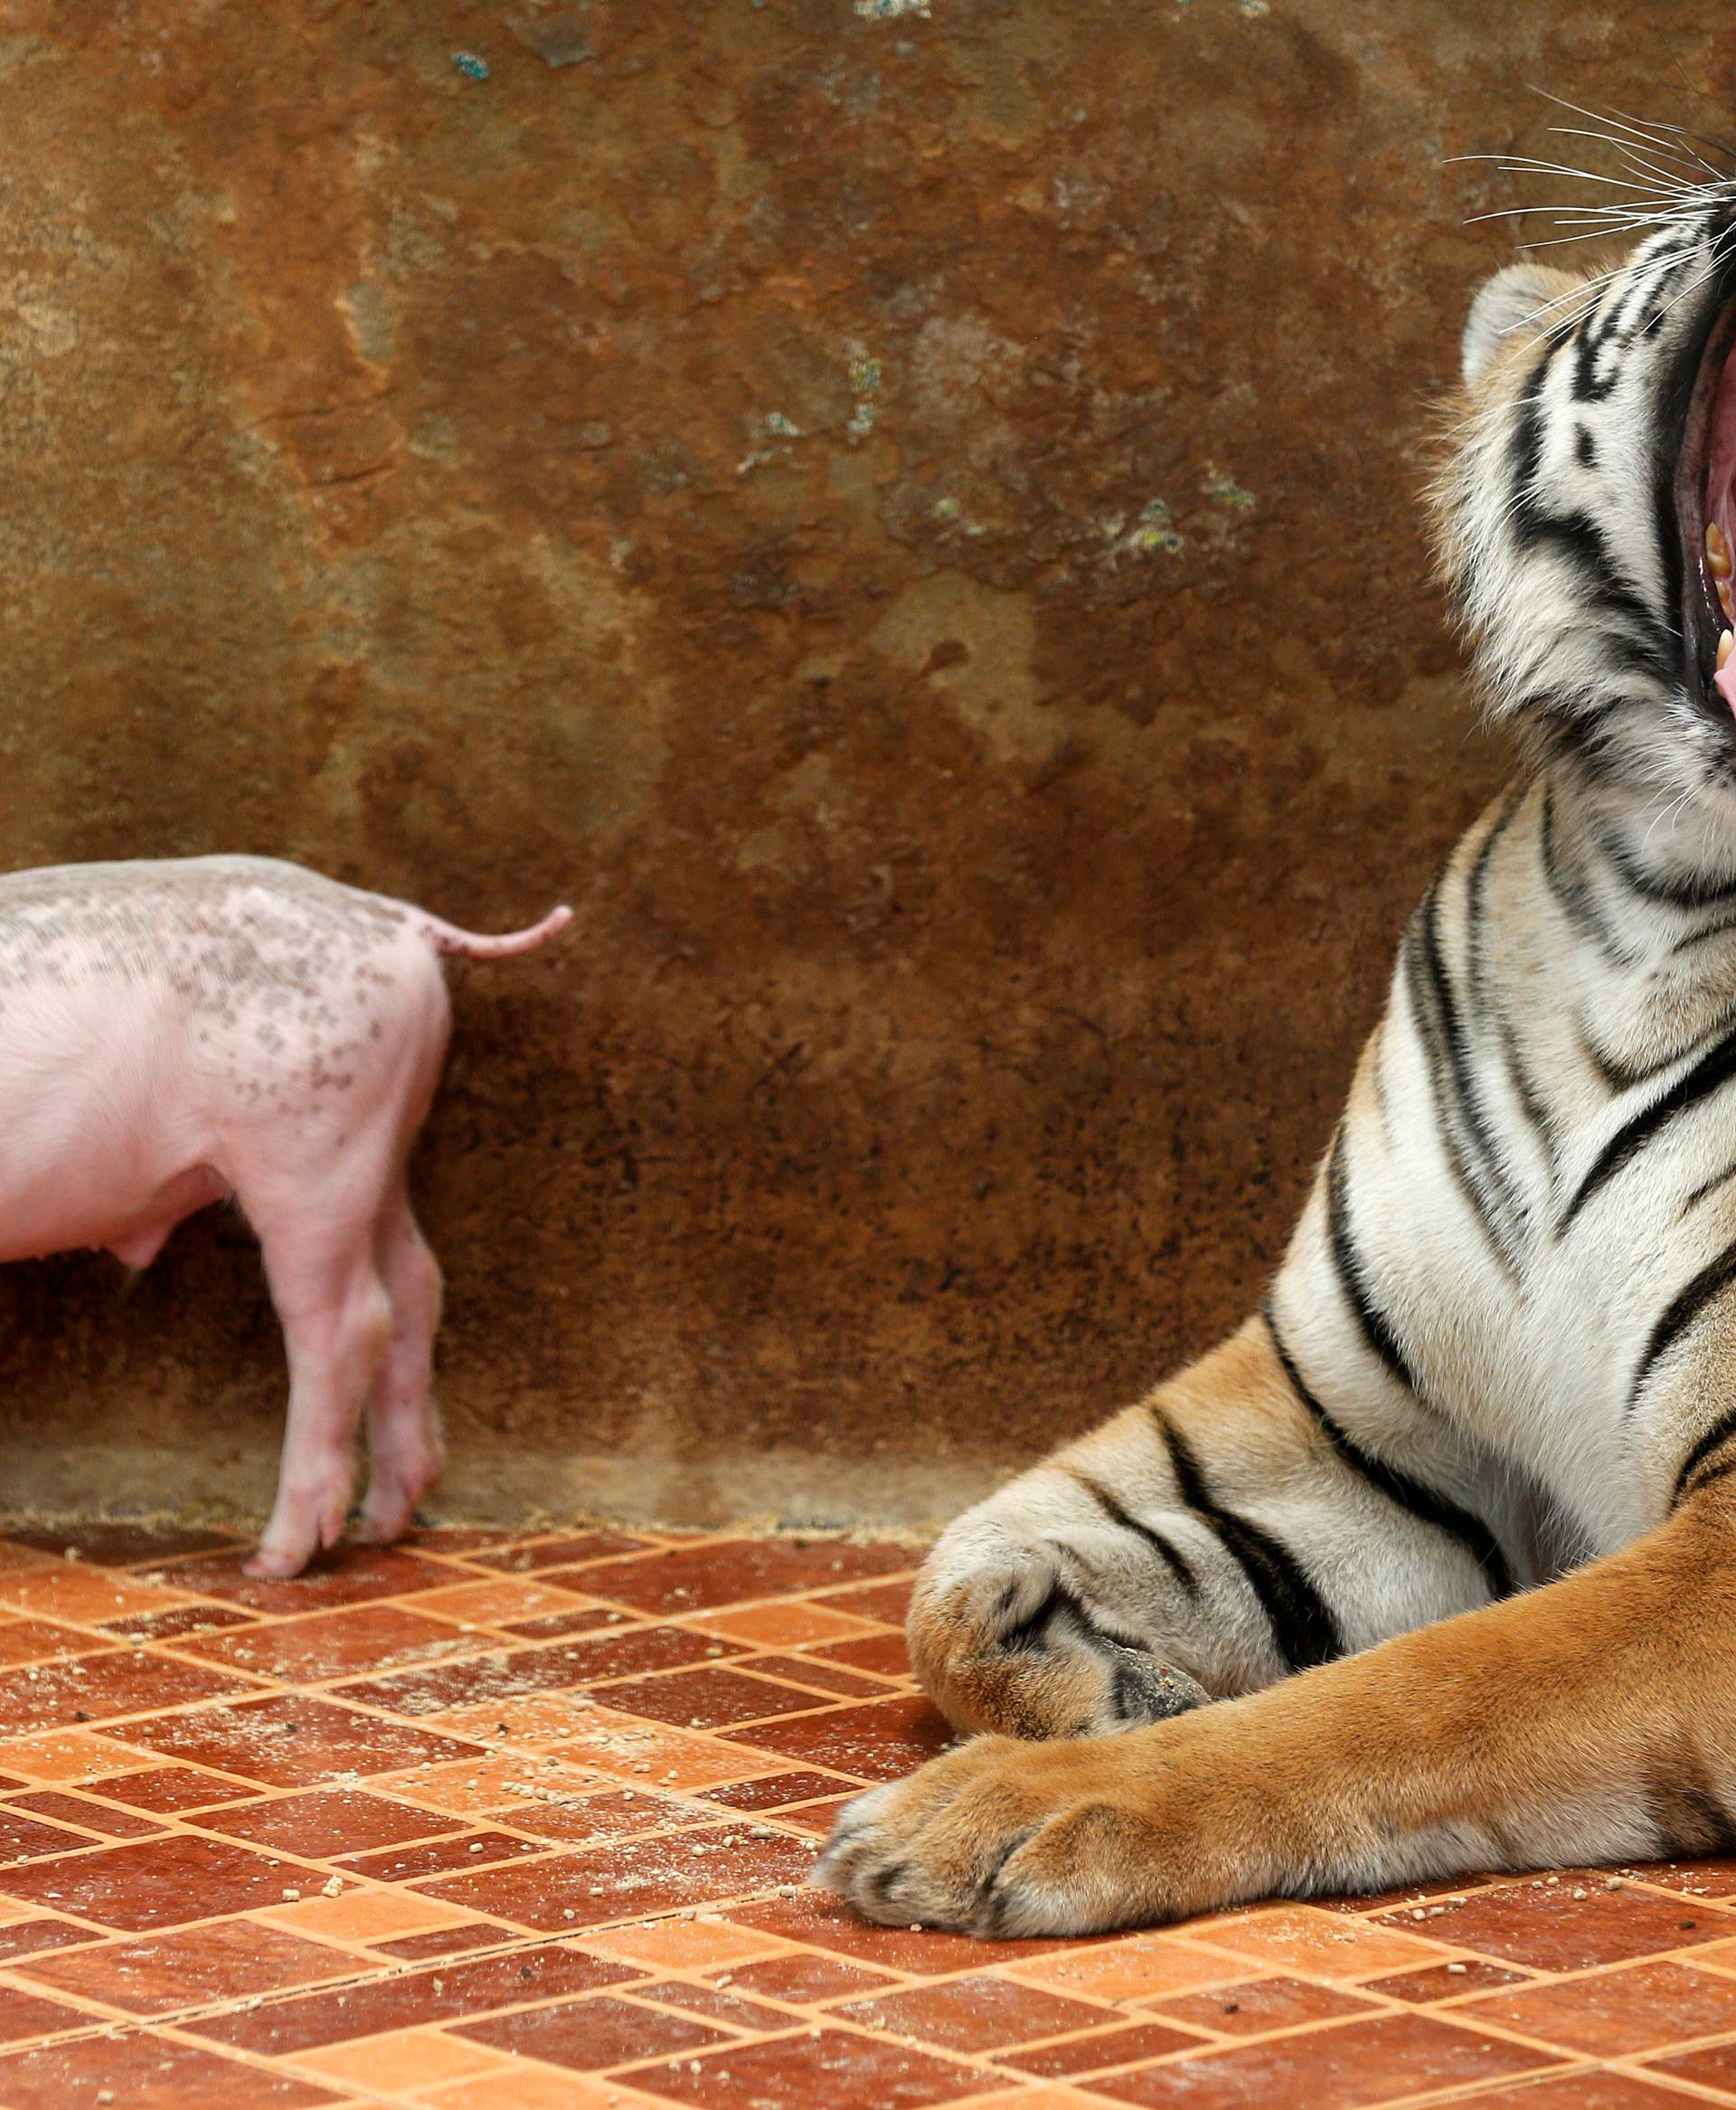 A tiger yawns next to a piglet at the Sriracha Tiger Zoo, in Chonburi province, Thailand